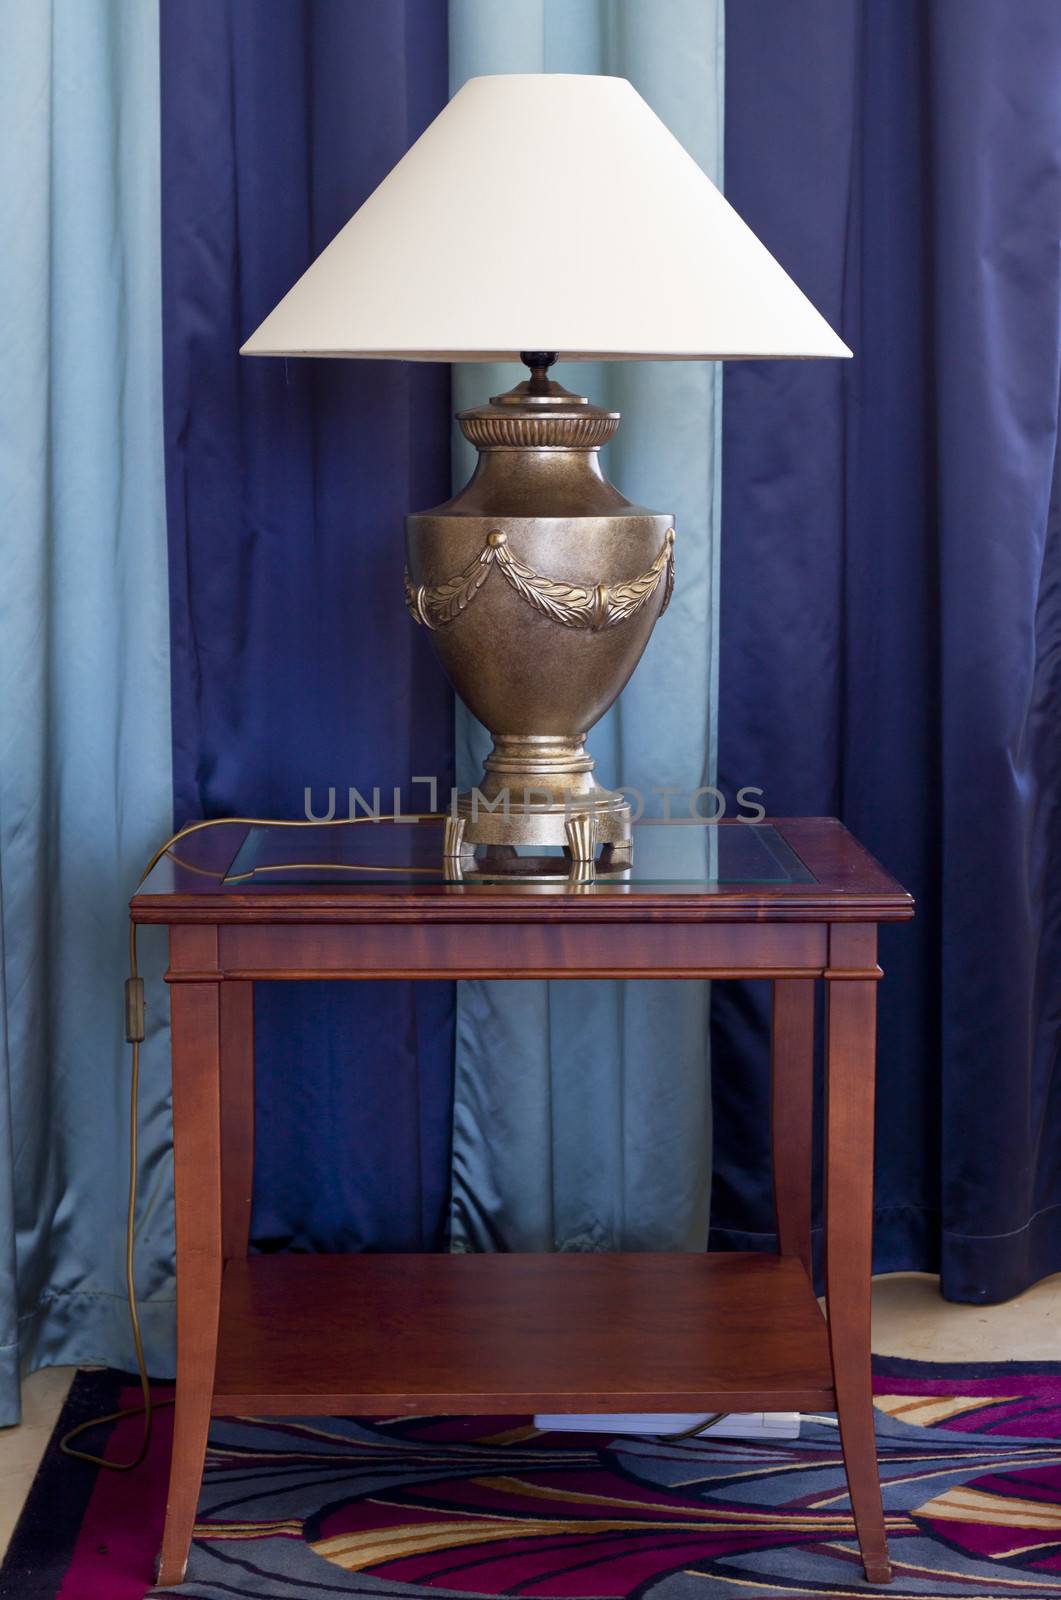 A living room lamp on a side table placed on a carpet and in front of a window with striped curtains